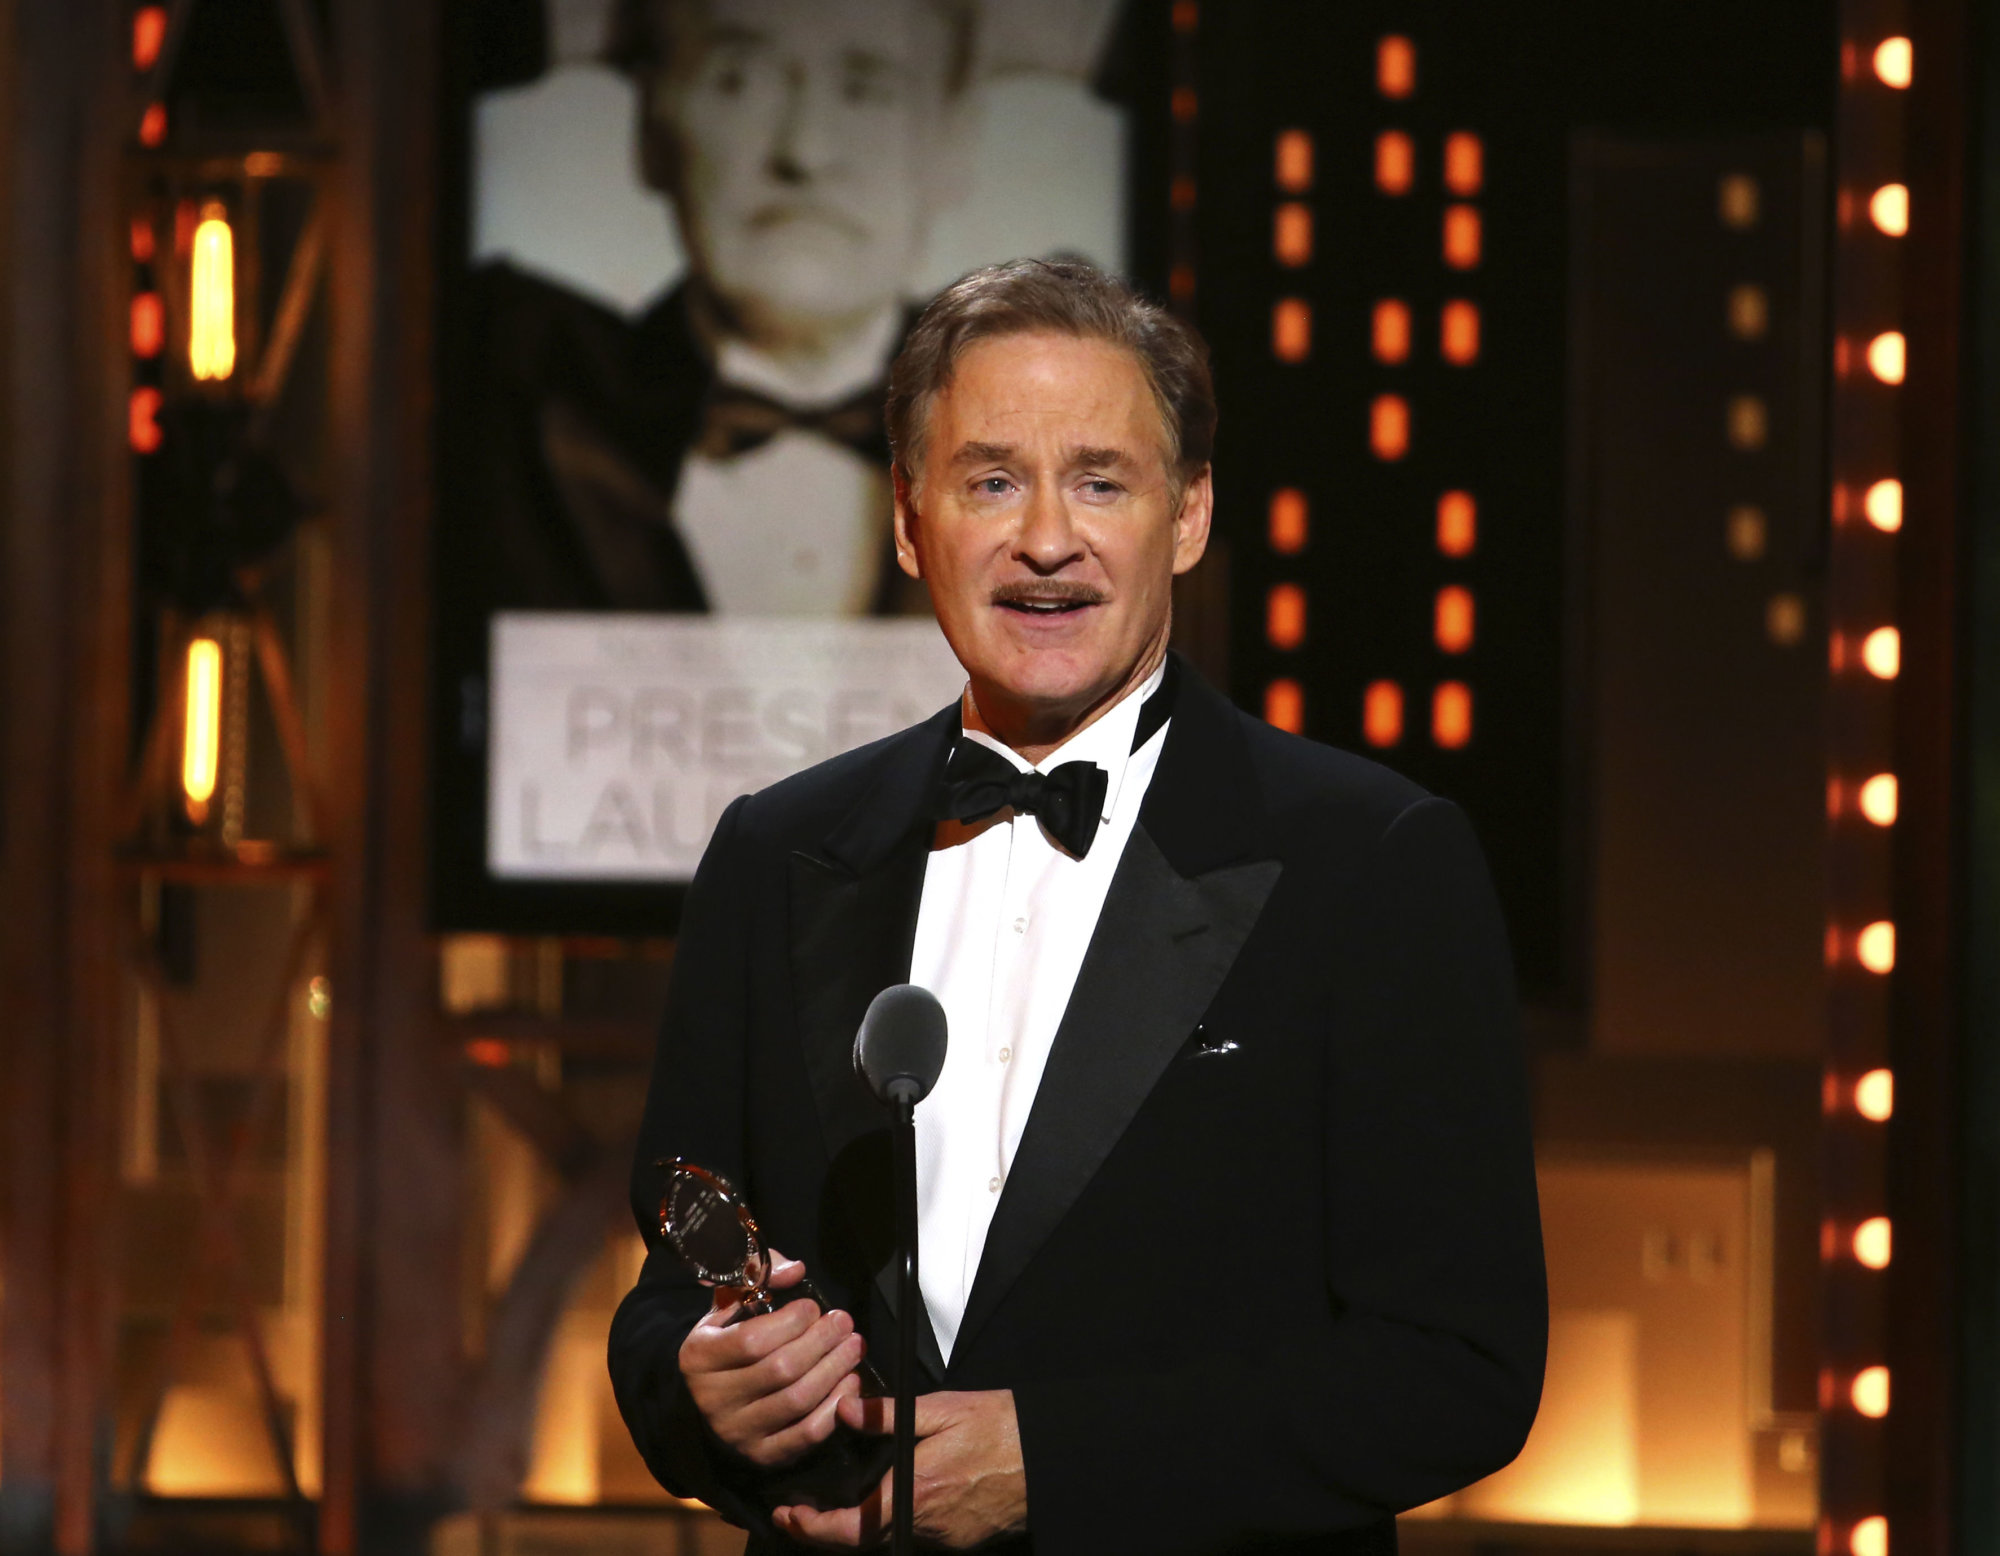 Kevin Kline accepts the award for best performance by an actor in a leading role in a play for "Present Laughter" at the 71st annual Tony Awards on Sunday, June 11, 2017, in New York. (Photo by Michael Zorn/Invision/AP)